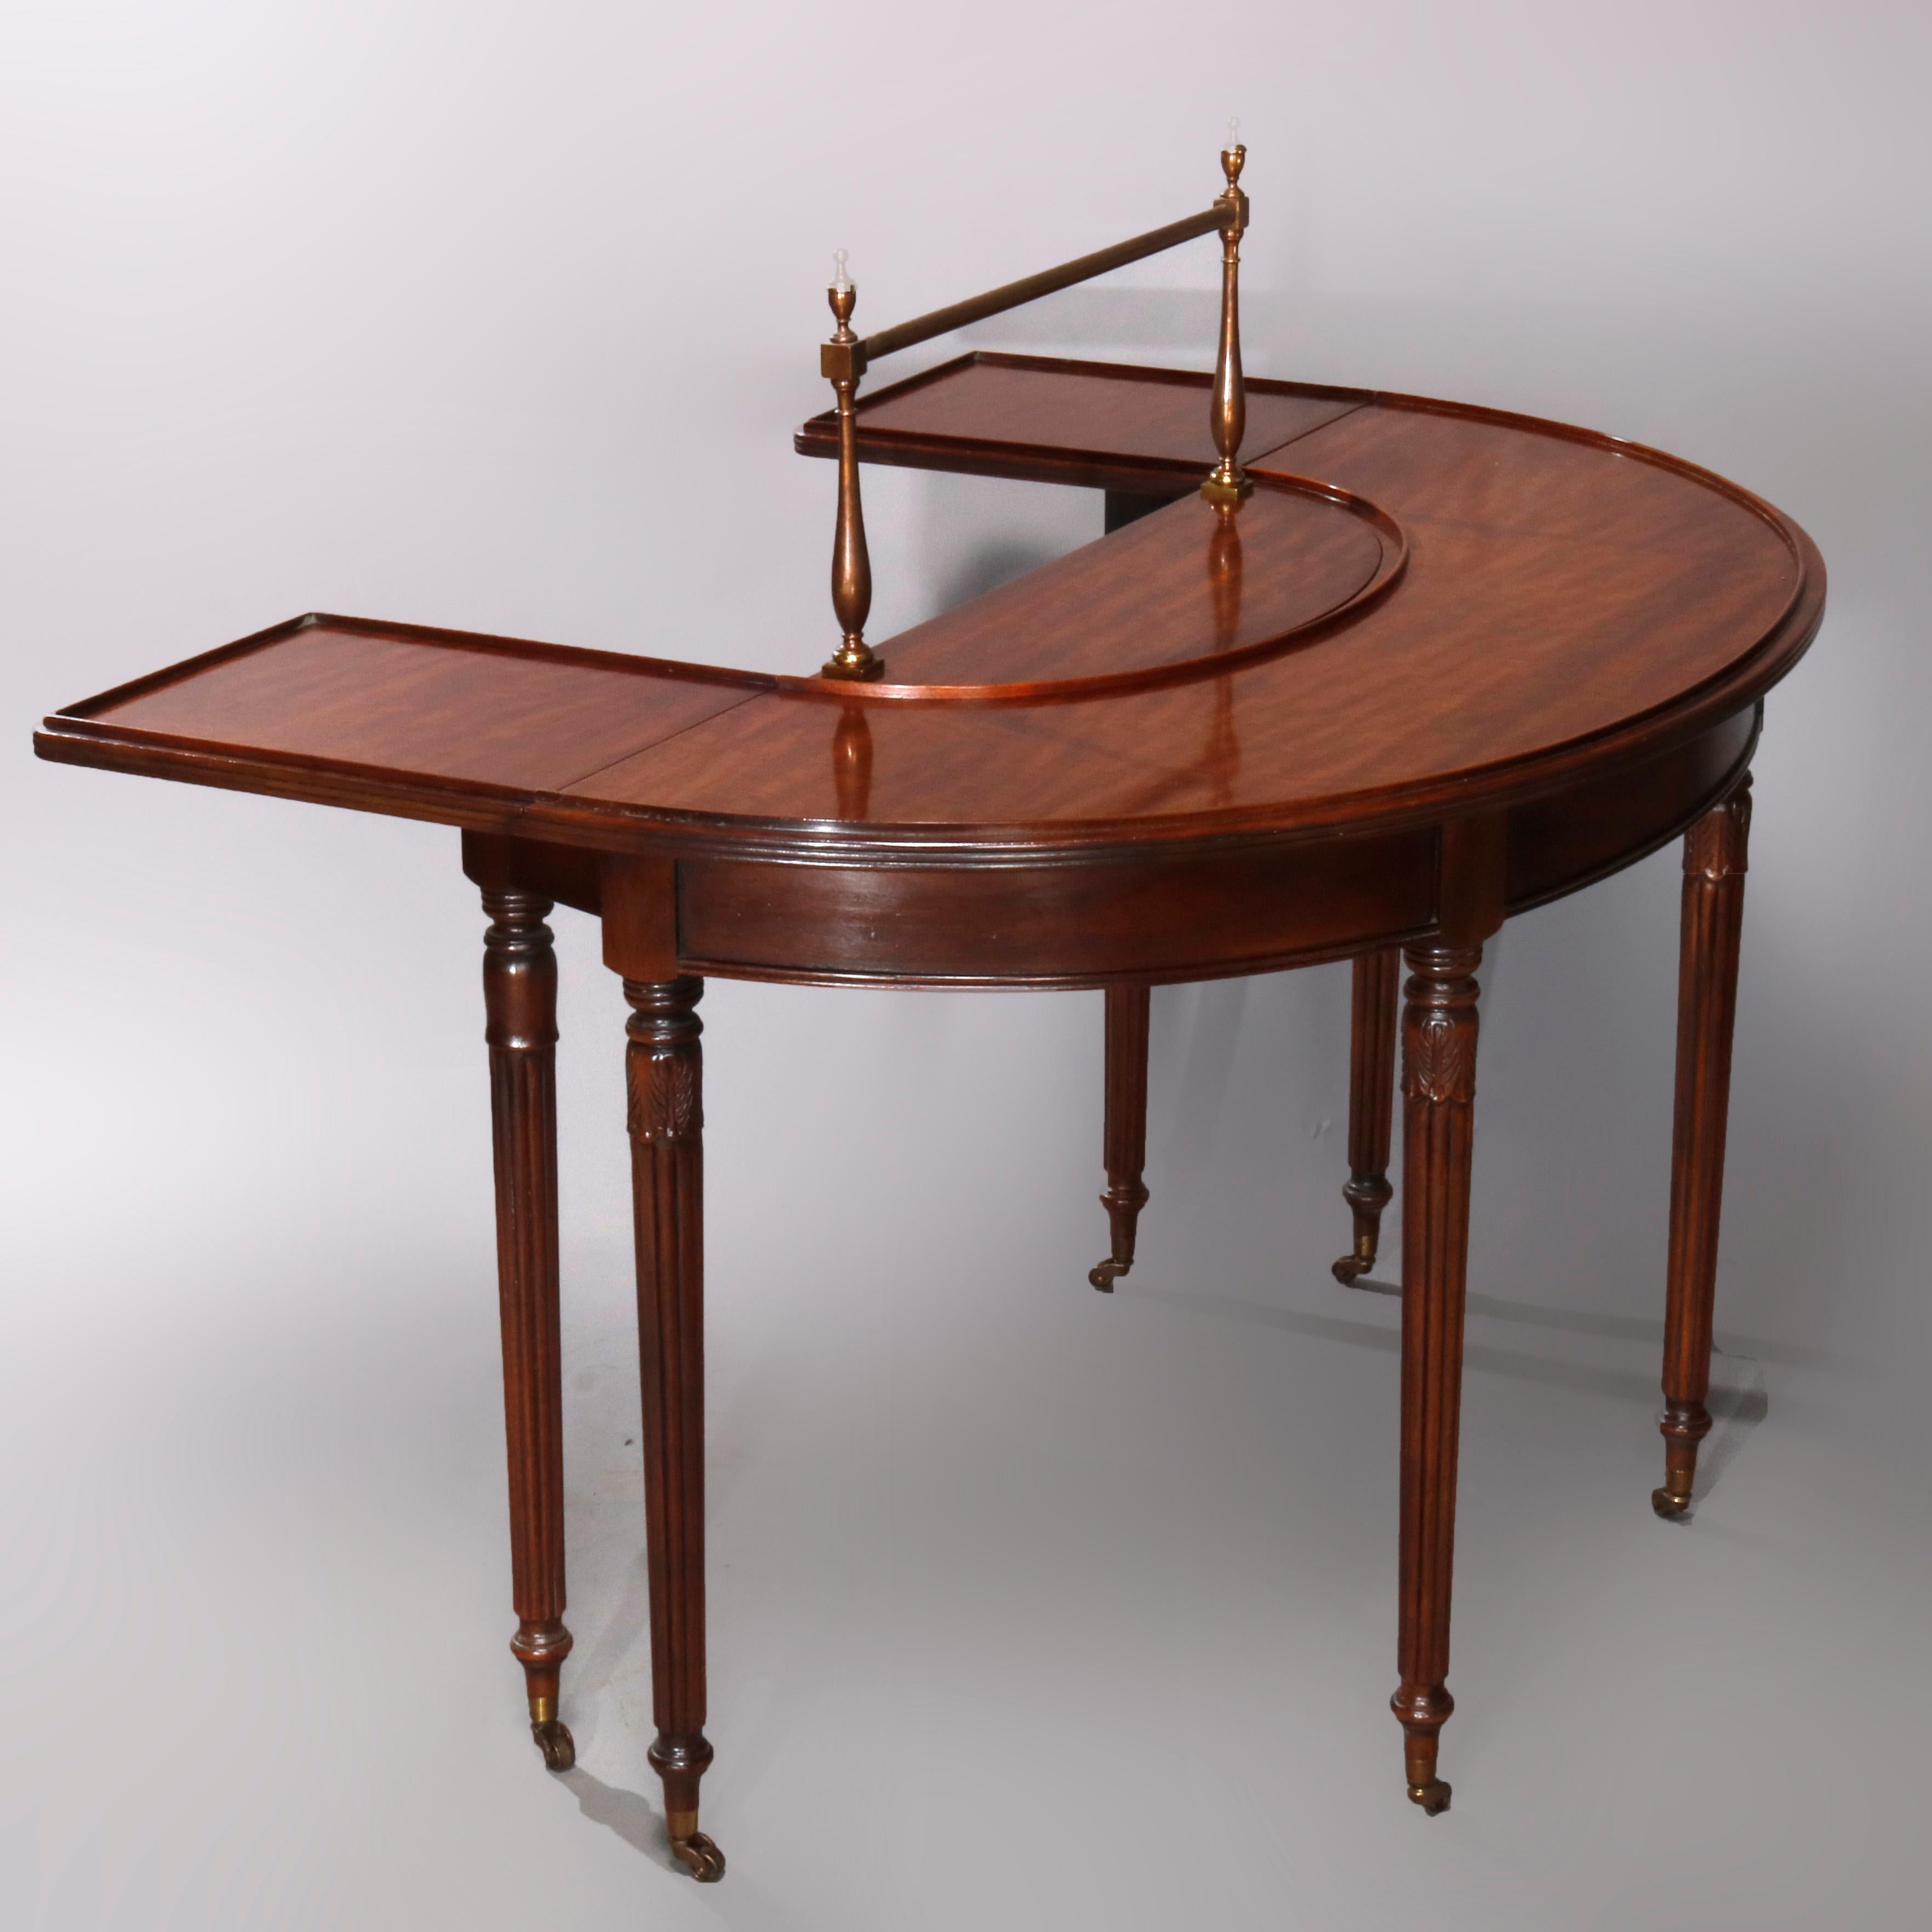 Sheraton Vintage Demilune Wallace Nutting Collection Serving Table by Drexel, circa 1940